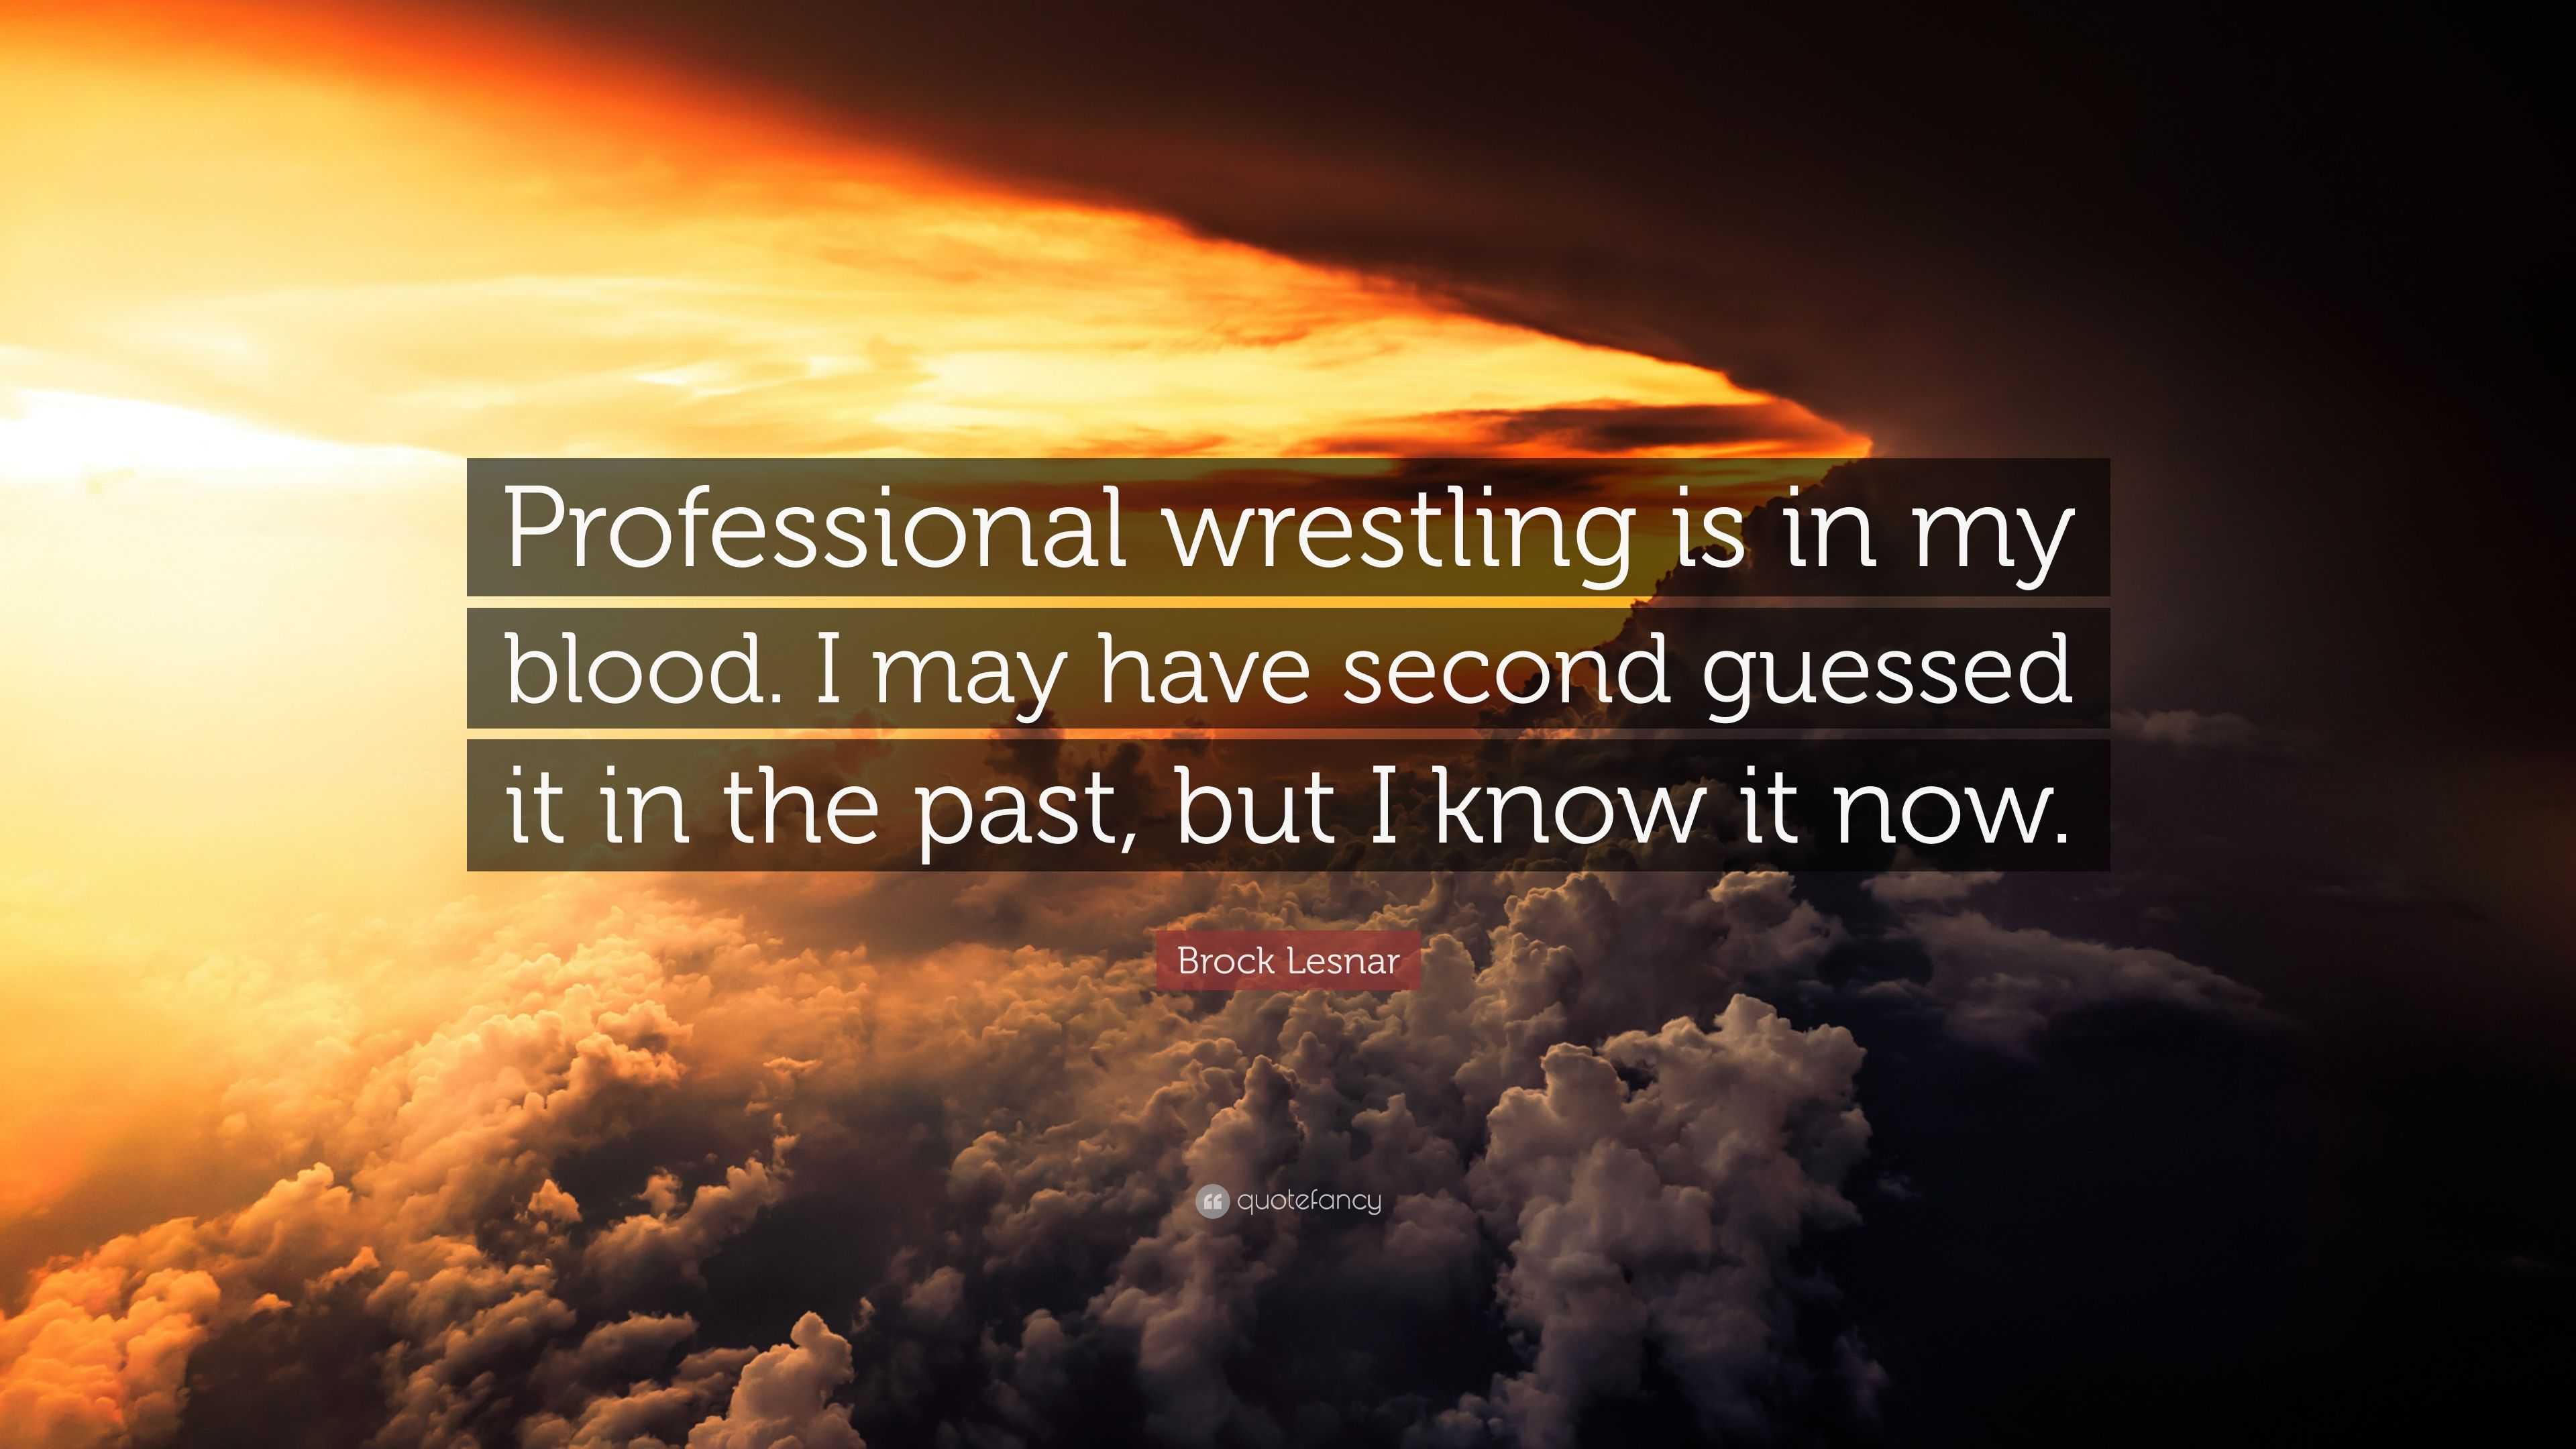 Brock Lesnar Quote: “Professional wrestling is in my blood. I may have